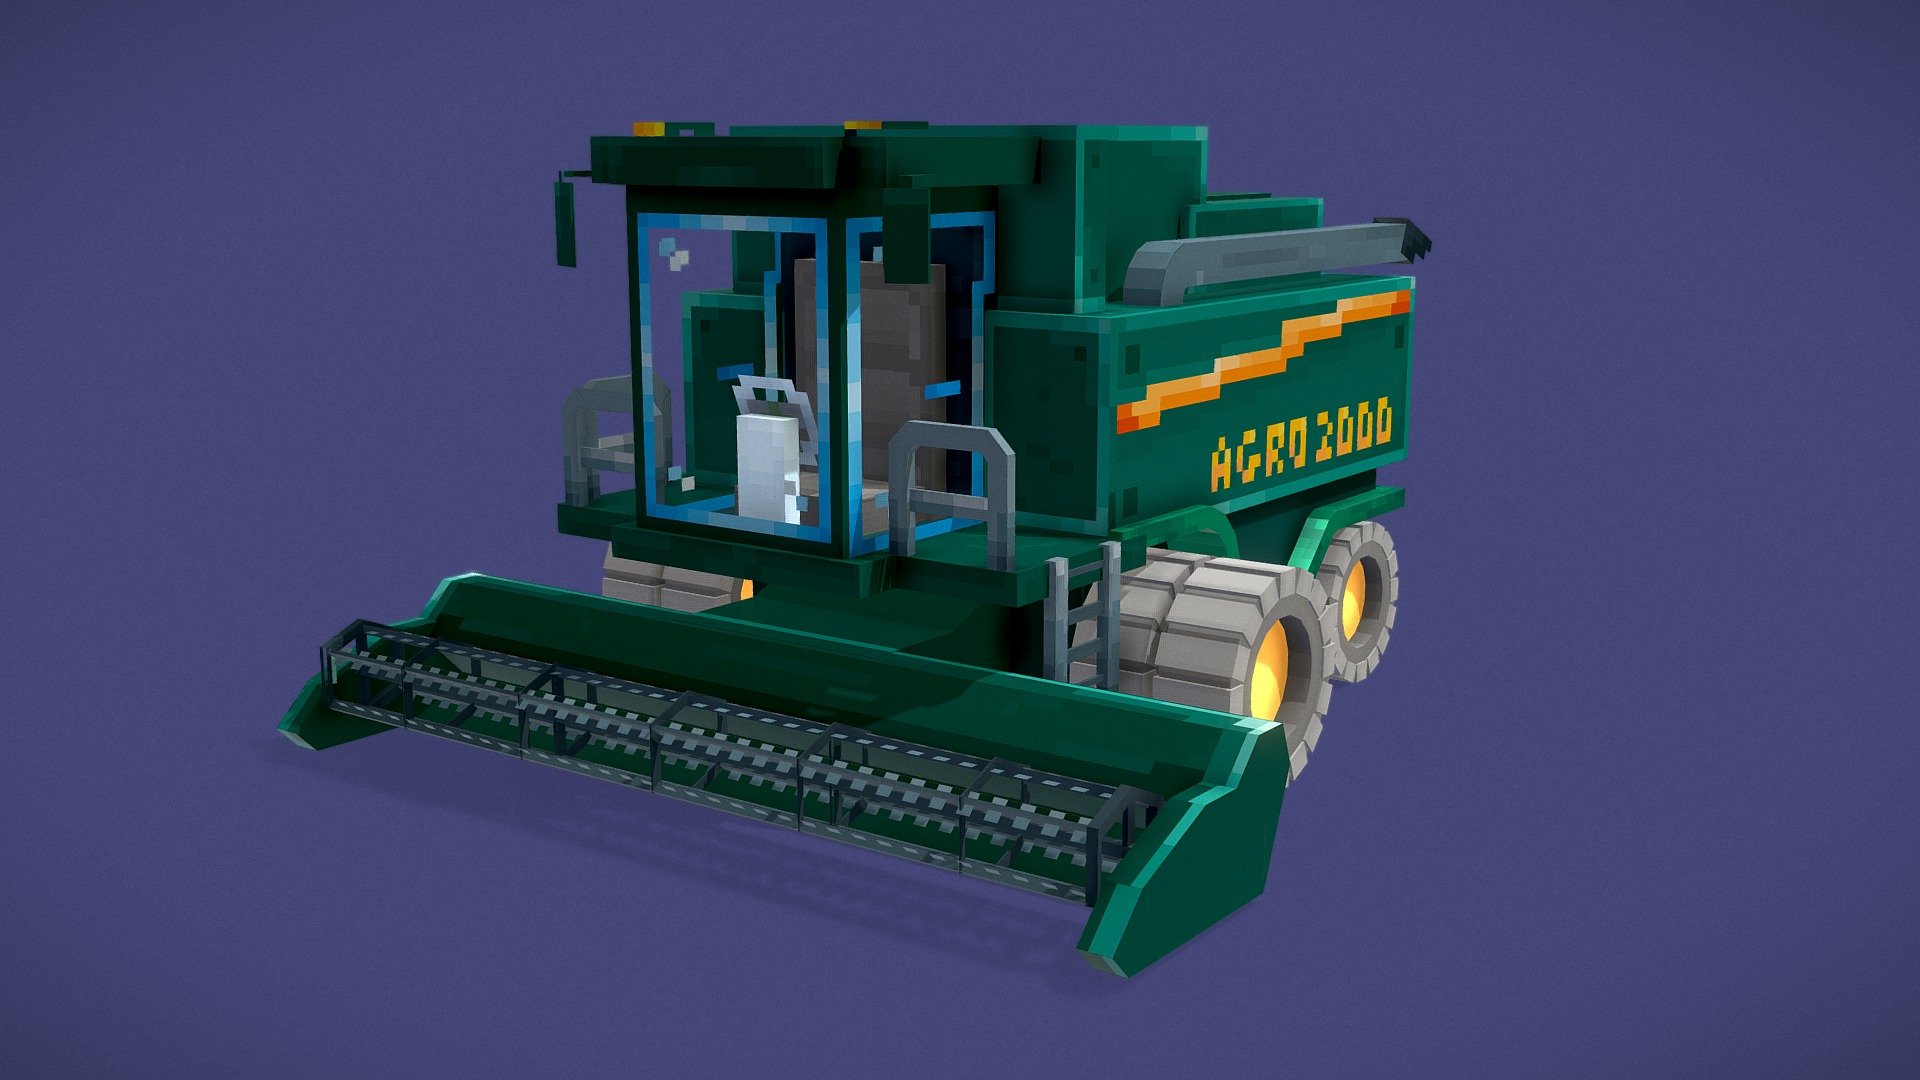 Green Combine Low Poly. Minecraft Java Edition Model. Made with Blockbench

Made on March/2021

Exclusive model for @LeariStudios - Green Combine | Low Poly | Minecraft - 3D model by Pedro "KOMLOW" (@pedrokomlow) 3d model